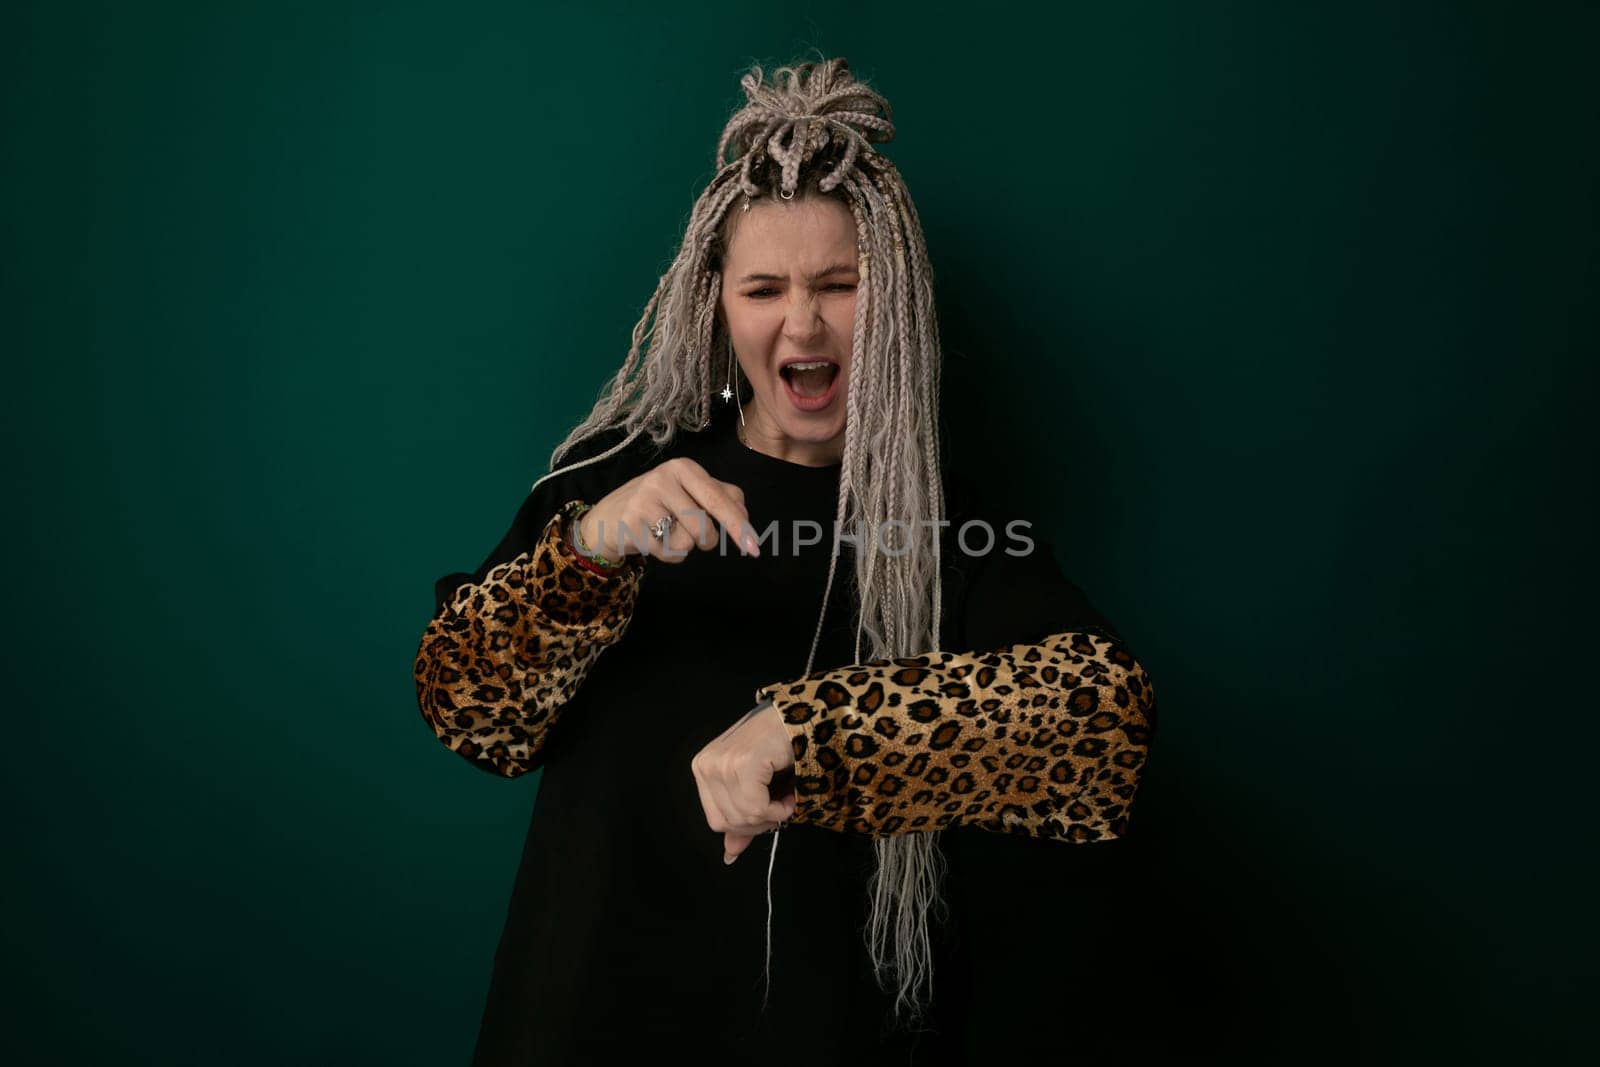 Woman With Long Hair and Leopard Print Glove by TRMK